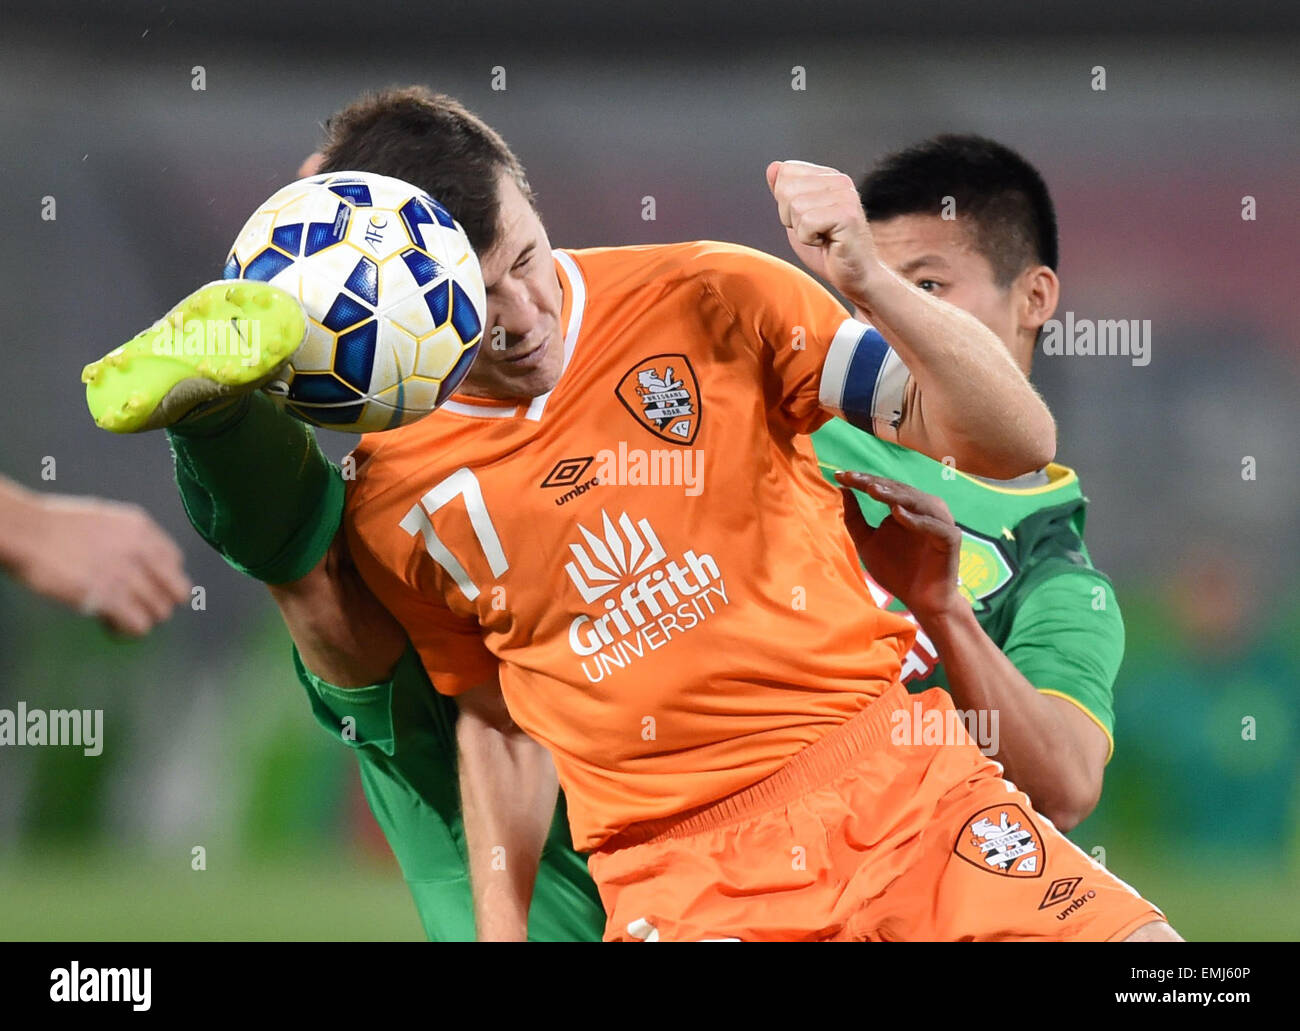 Beijing, China. 21st Apr, 2015. Matt Mckay (front) of Australia's Brisbane Roar vies with Chen Zhizhao of China's Beijing Guoan during a Group G match at the AFC Champions League 2015 in Beijing, capital of China, April 21, 2015. Brisbane Roar won 1-0. © Guo Yong/Xinhua/Alamy Live News Stock Photo